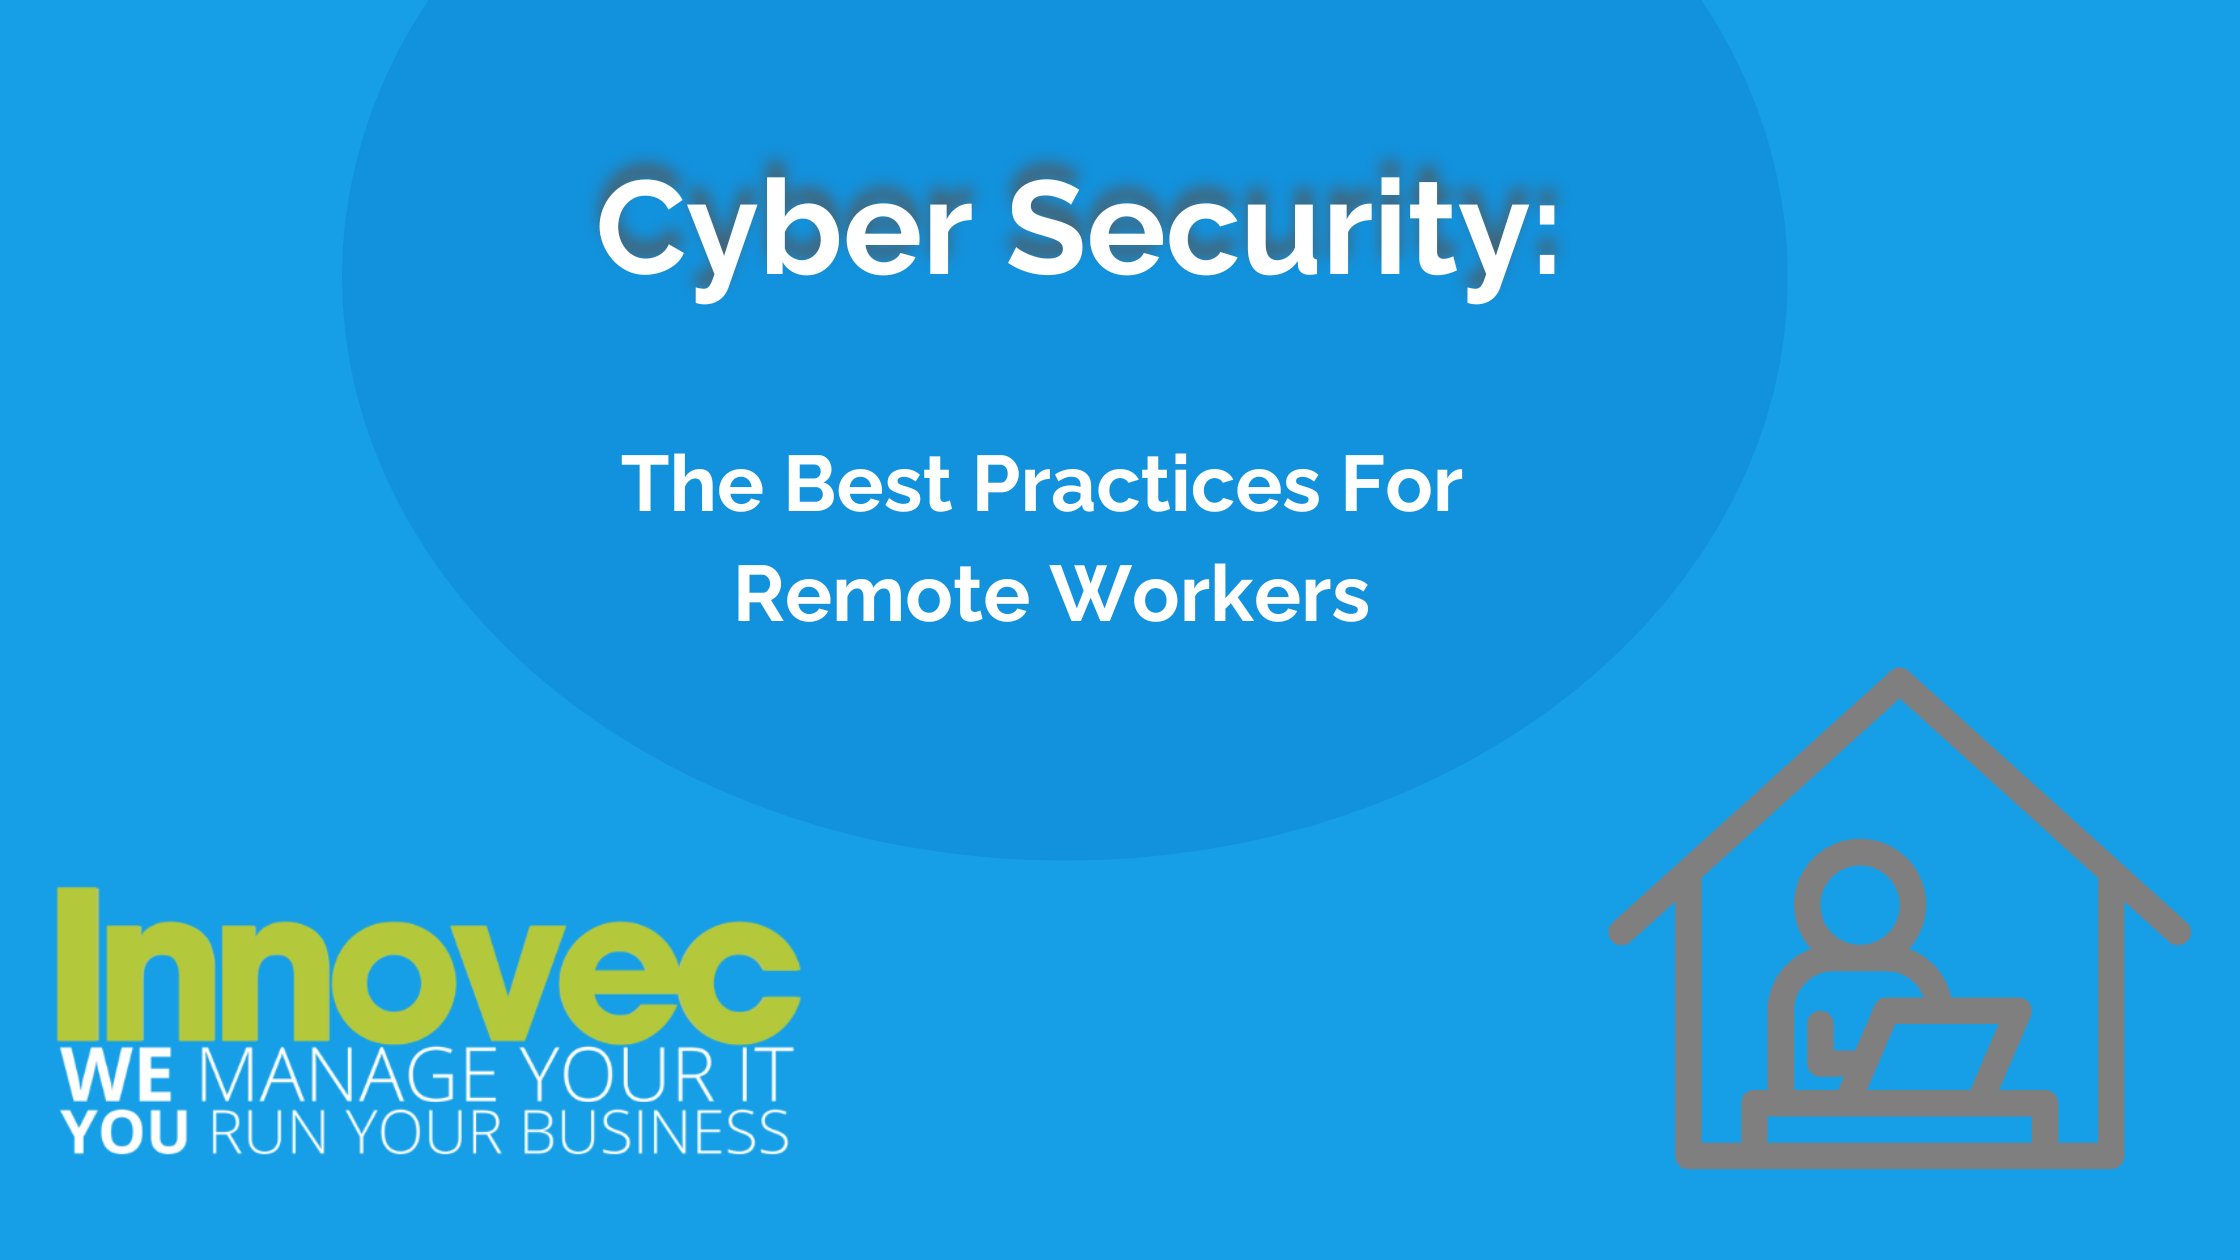 Cyber Security Practices For Remote Workers